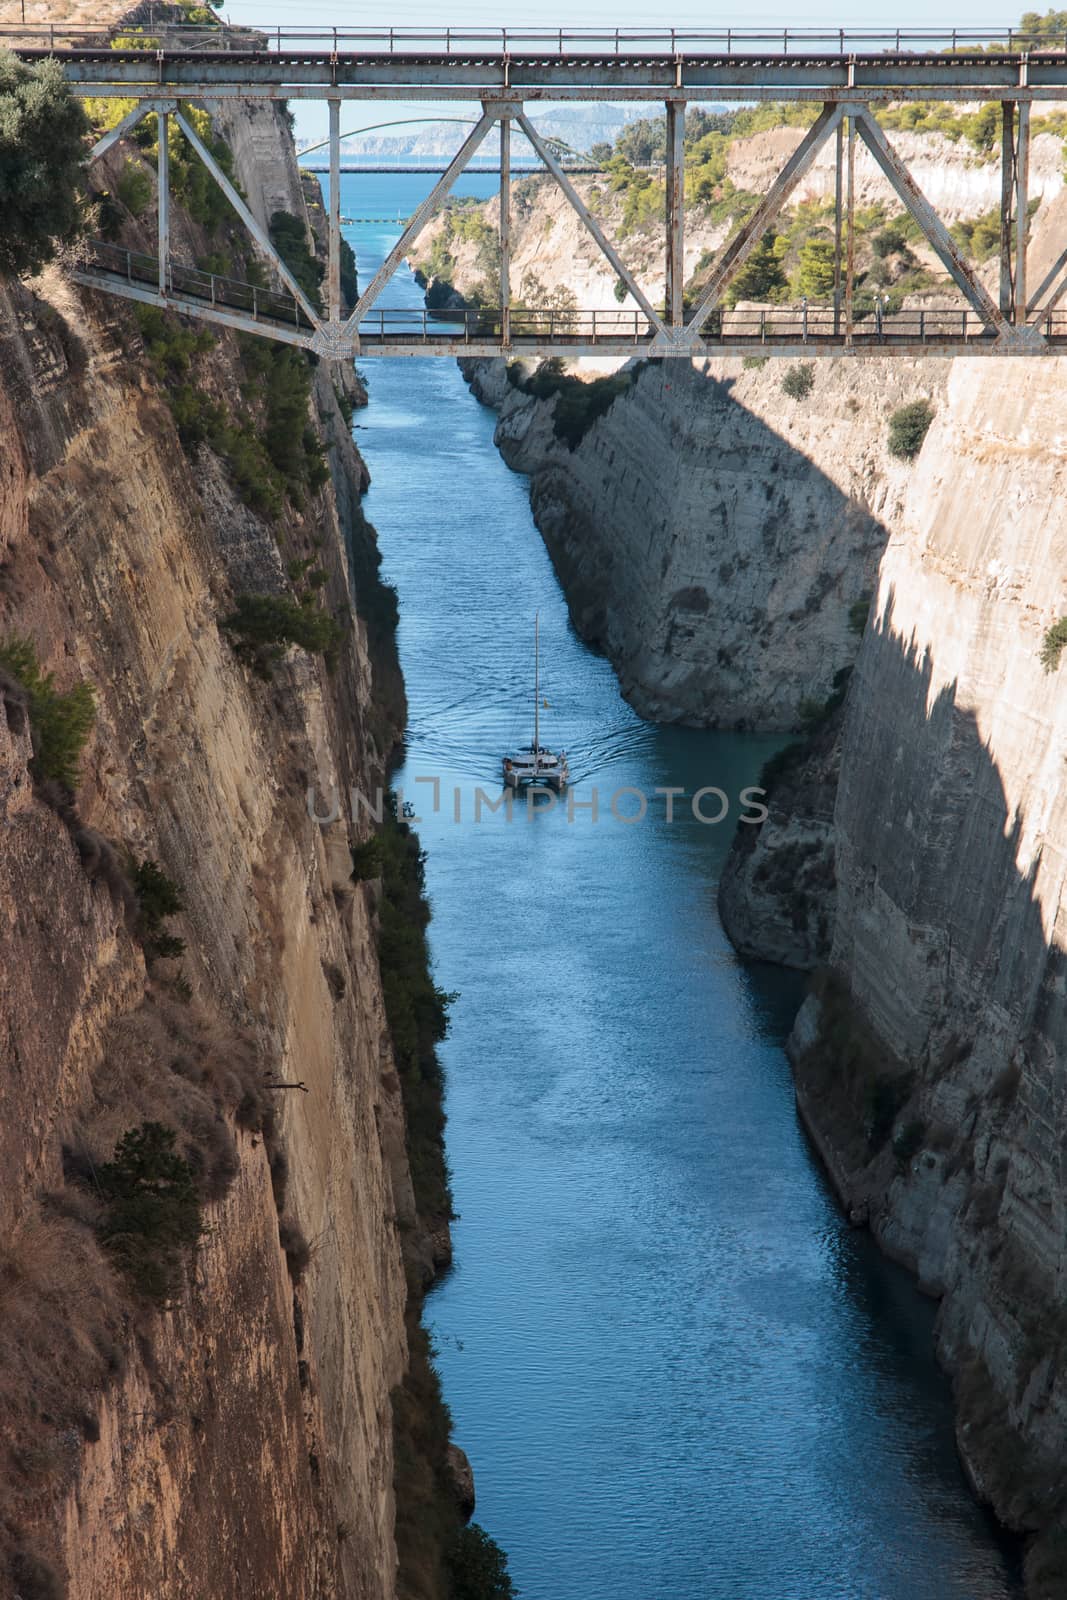 The Corinth Canal, Greece. The Corinth Canal is a canal that connects the Gulf of Corinth with the Saronic Gulf in the Aegean Sea.